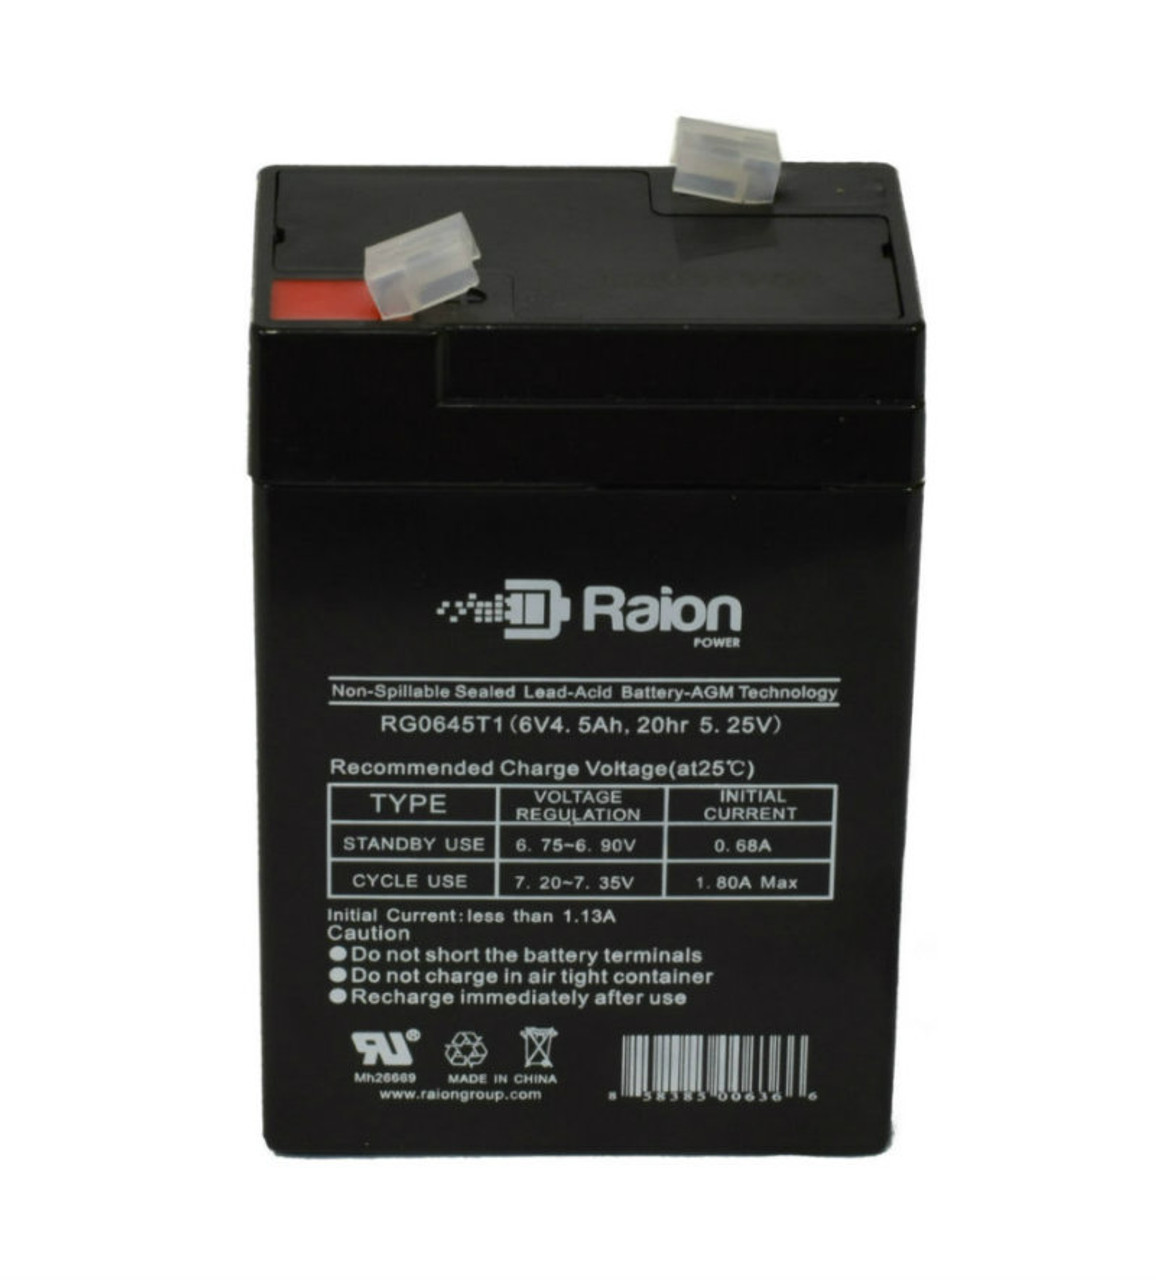 Raion Power RG0645T1 Replacement Battery Cartridge for Mule 6GC012D